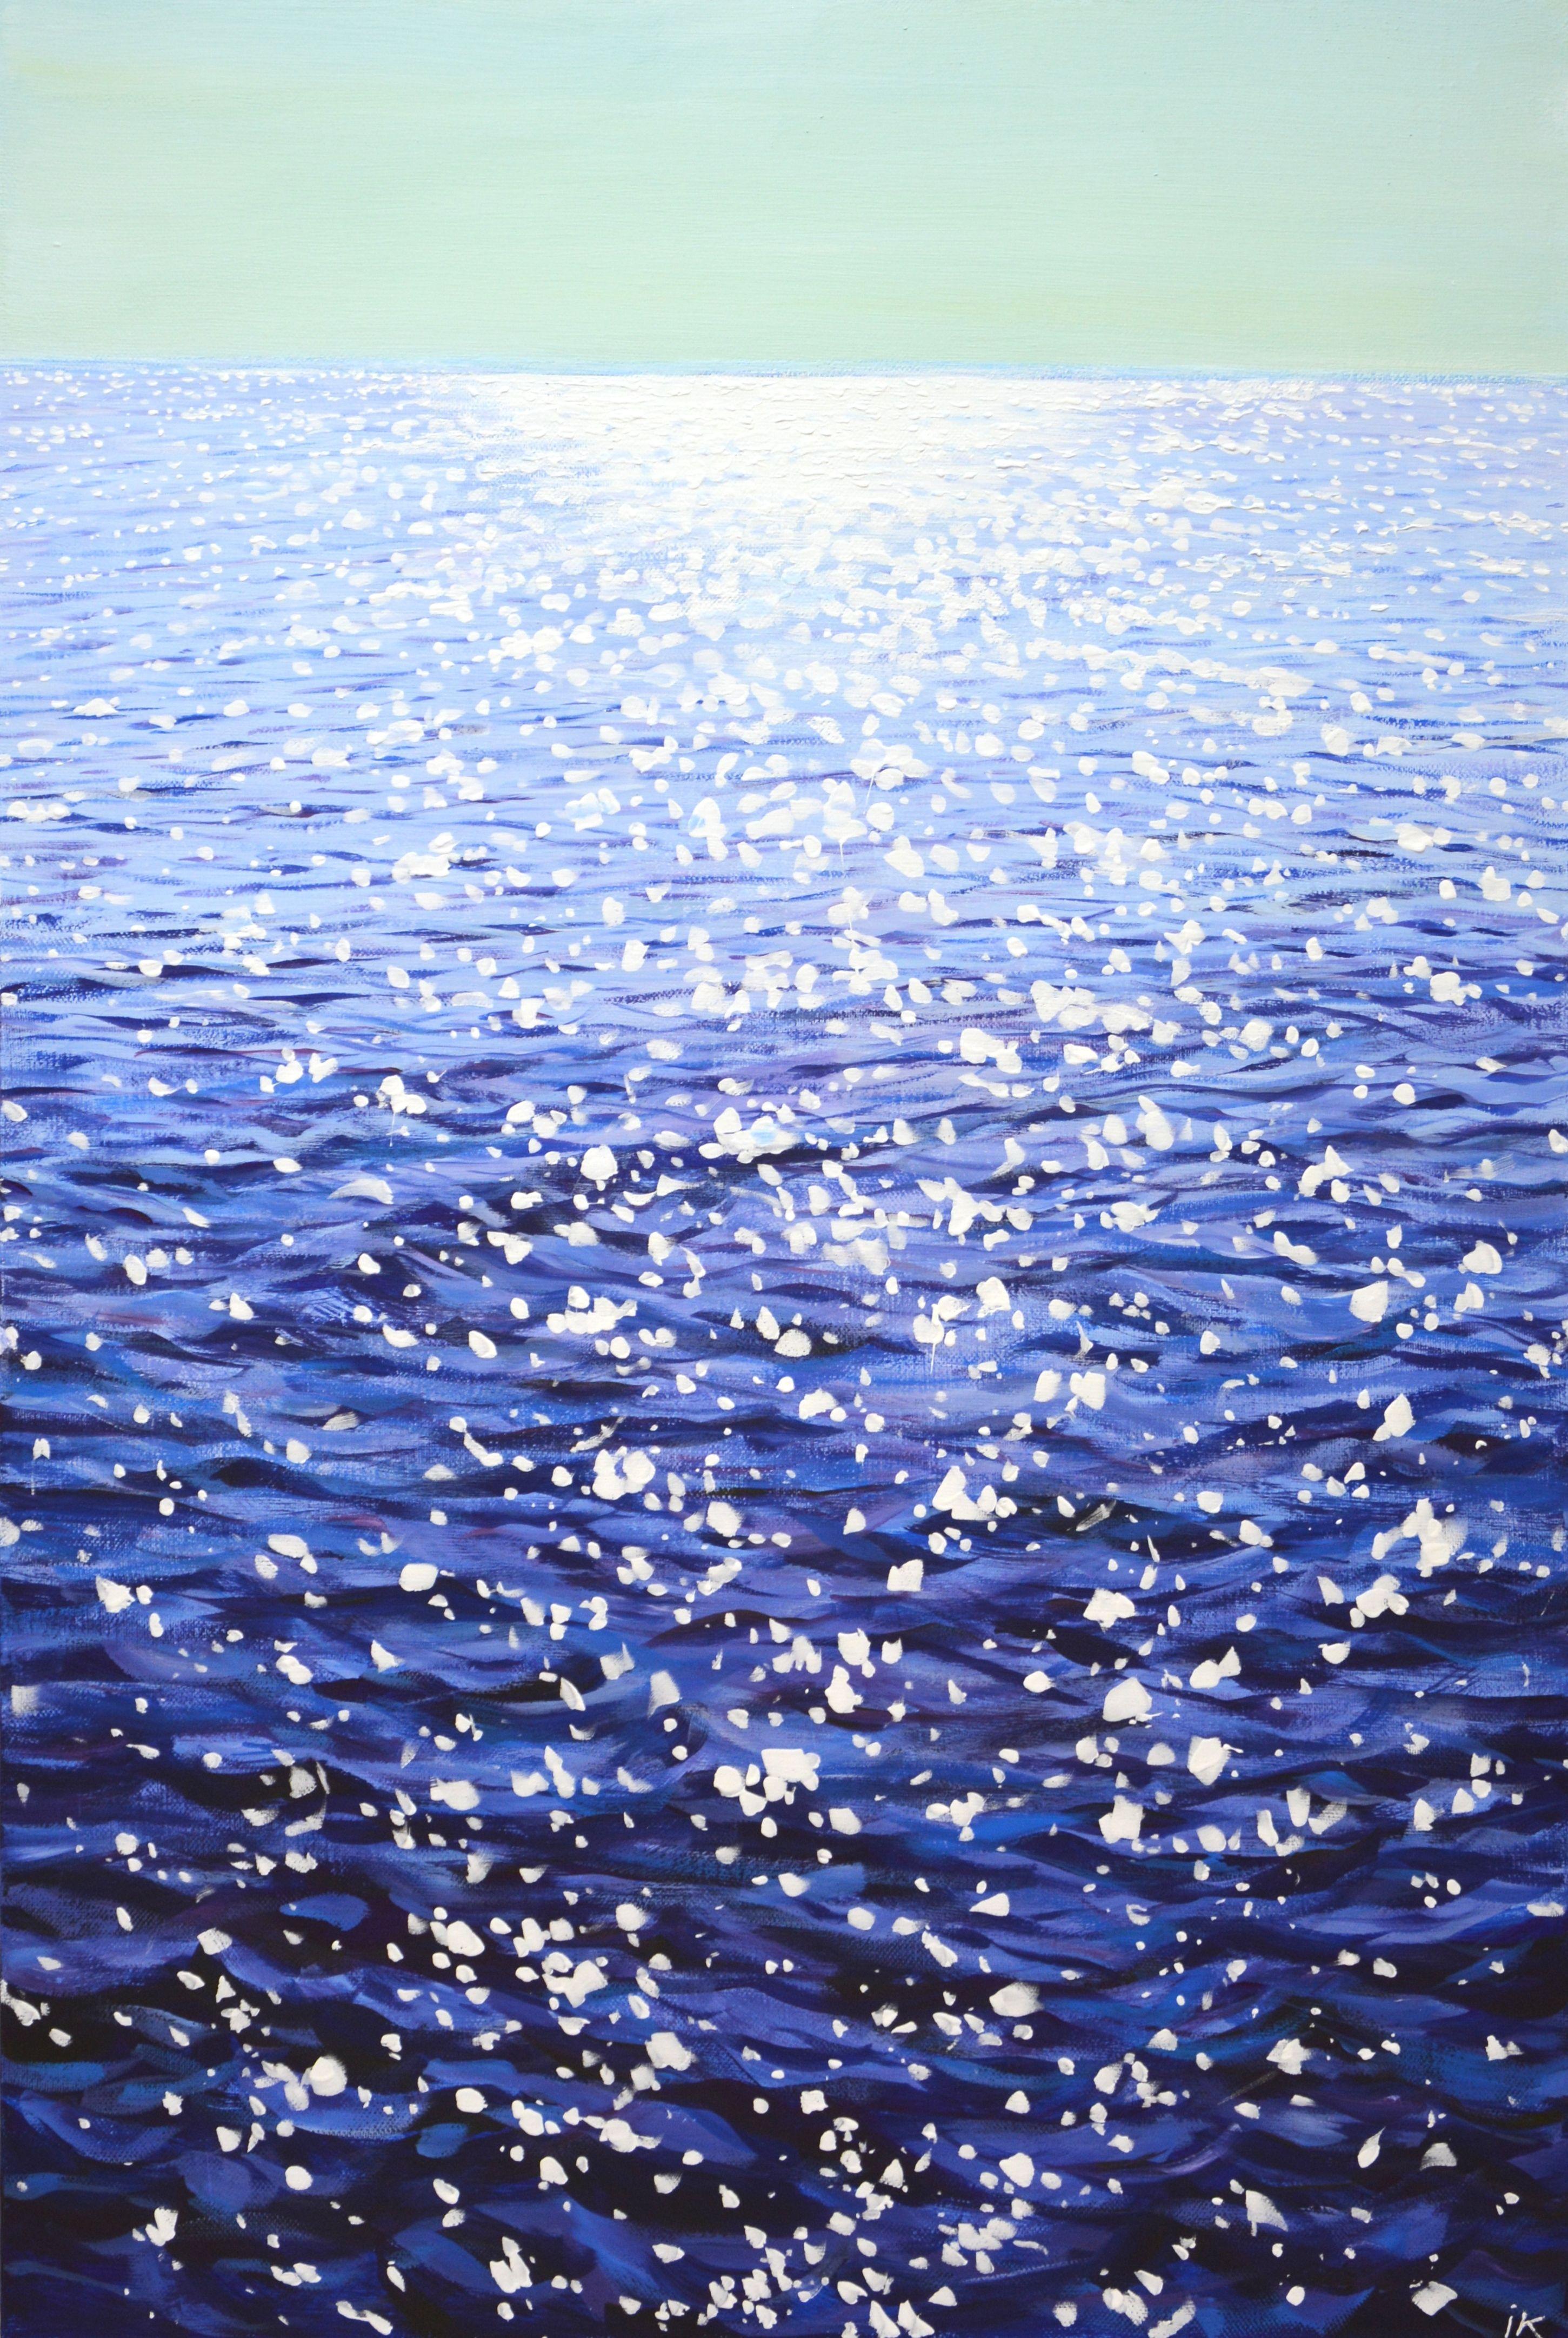 Dancing glare on the water. Blue water, blue ocean, clear sky, reflections on the water create an atmosphere of relaxation, serenity, romance. Made in the style of realism, deep blue, white palette emphasizes the energy of water. Part of a permanent